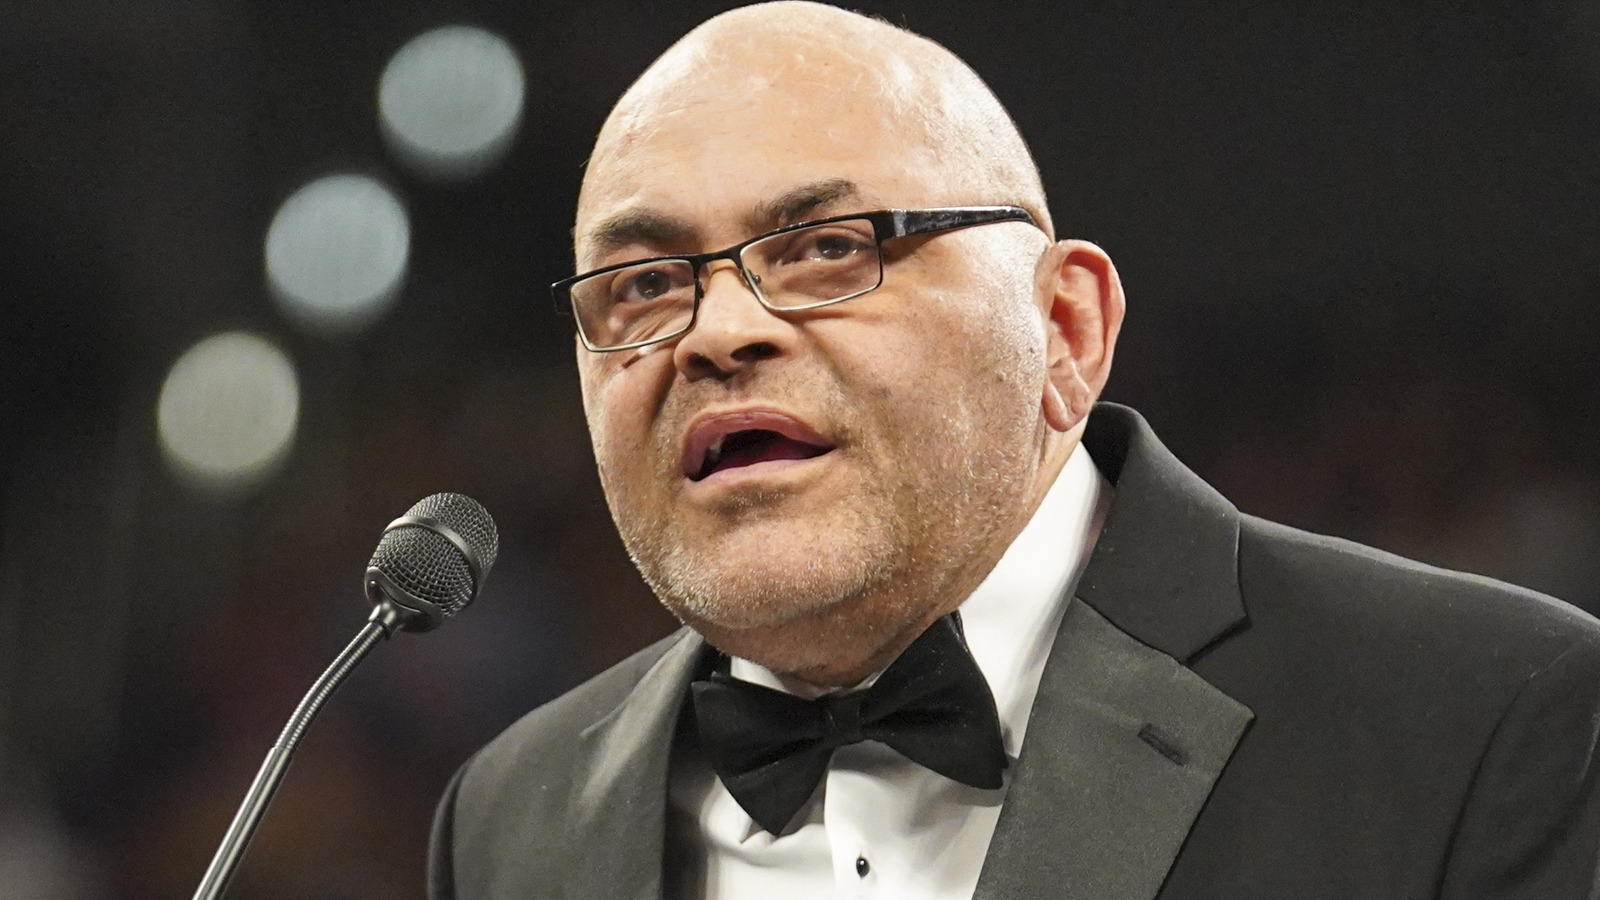 Konnan Teases Lucha Show On Major Network: 'Lucha Underground Was Just An Appetizer'